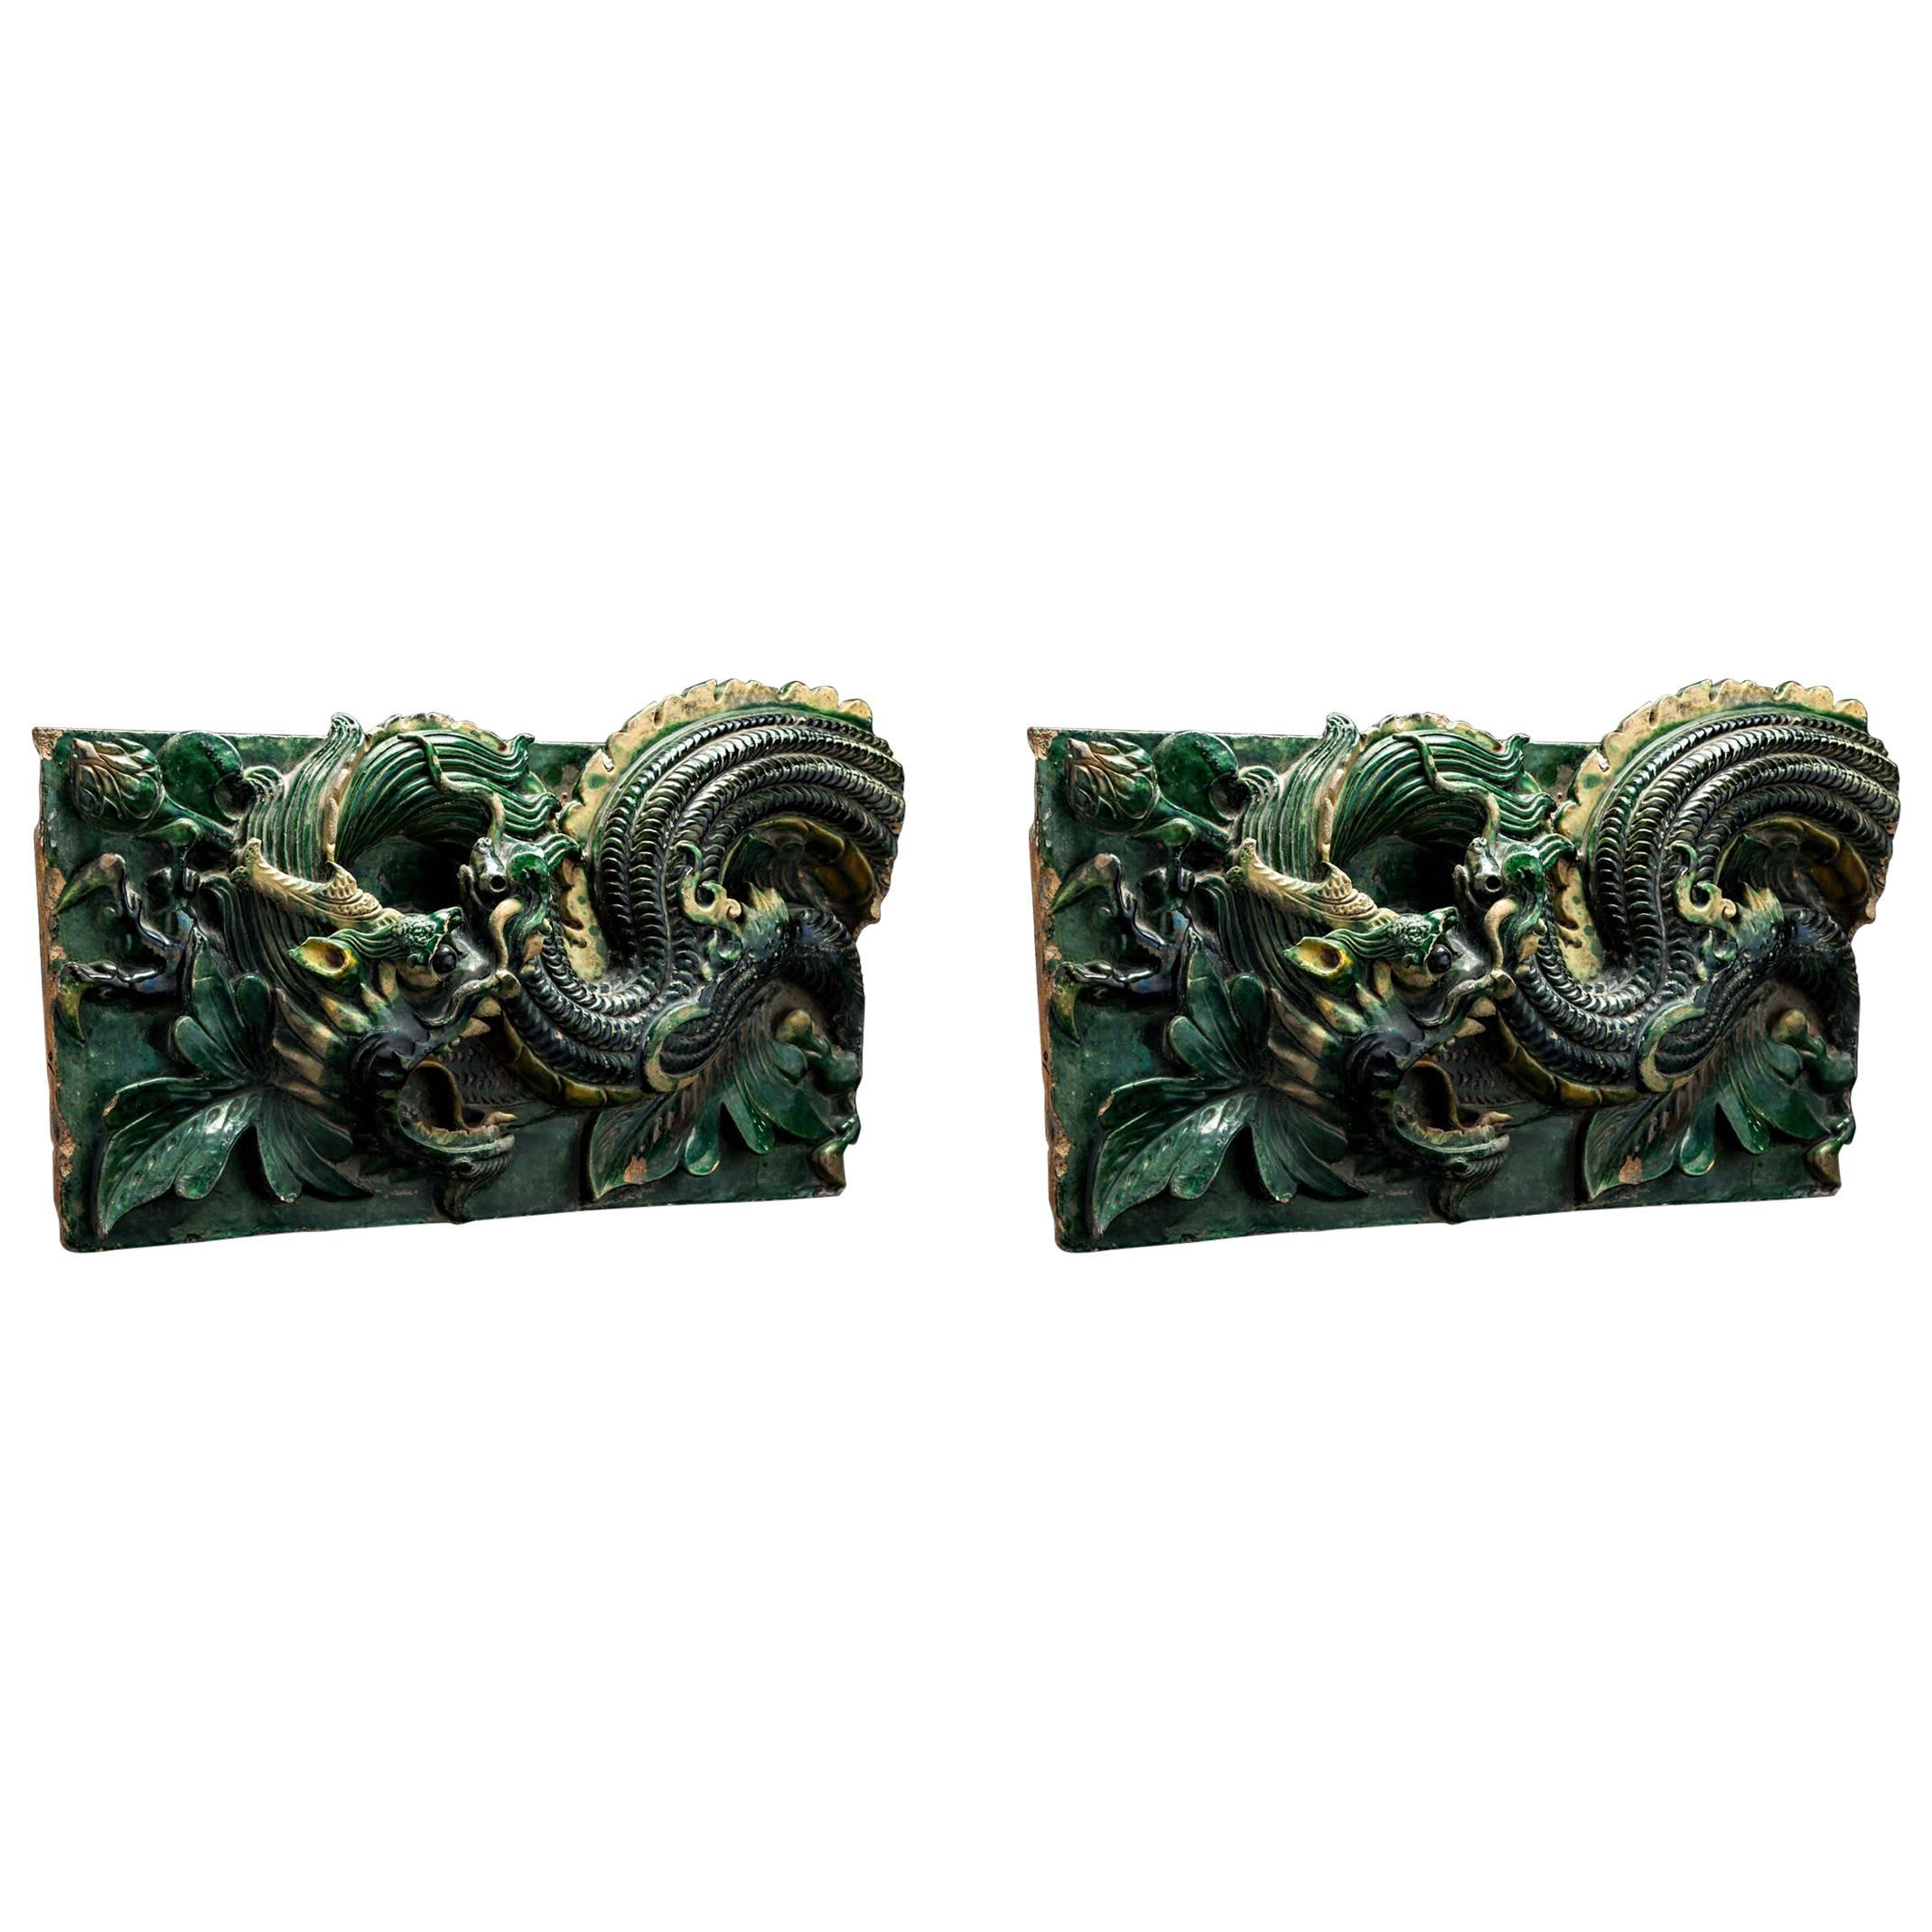 Pair of Ming Glazed Terracotta Temple Wall Tiles Depicting a Dragon For Sale